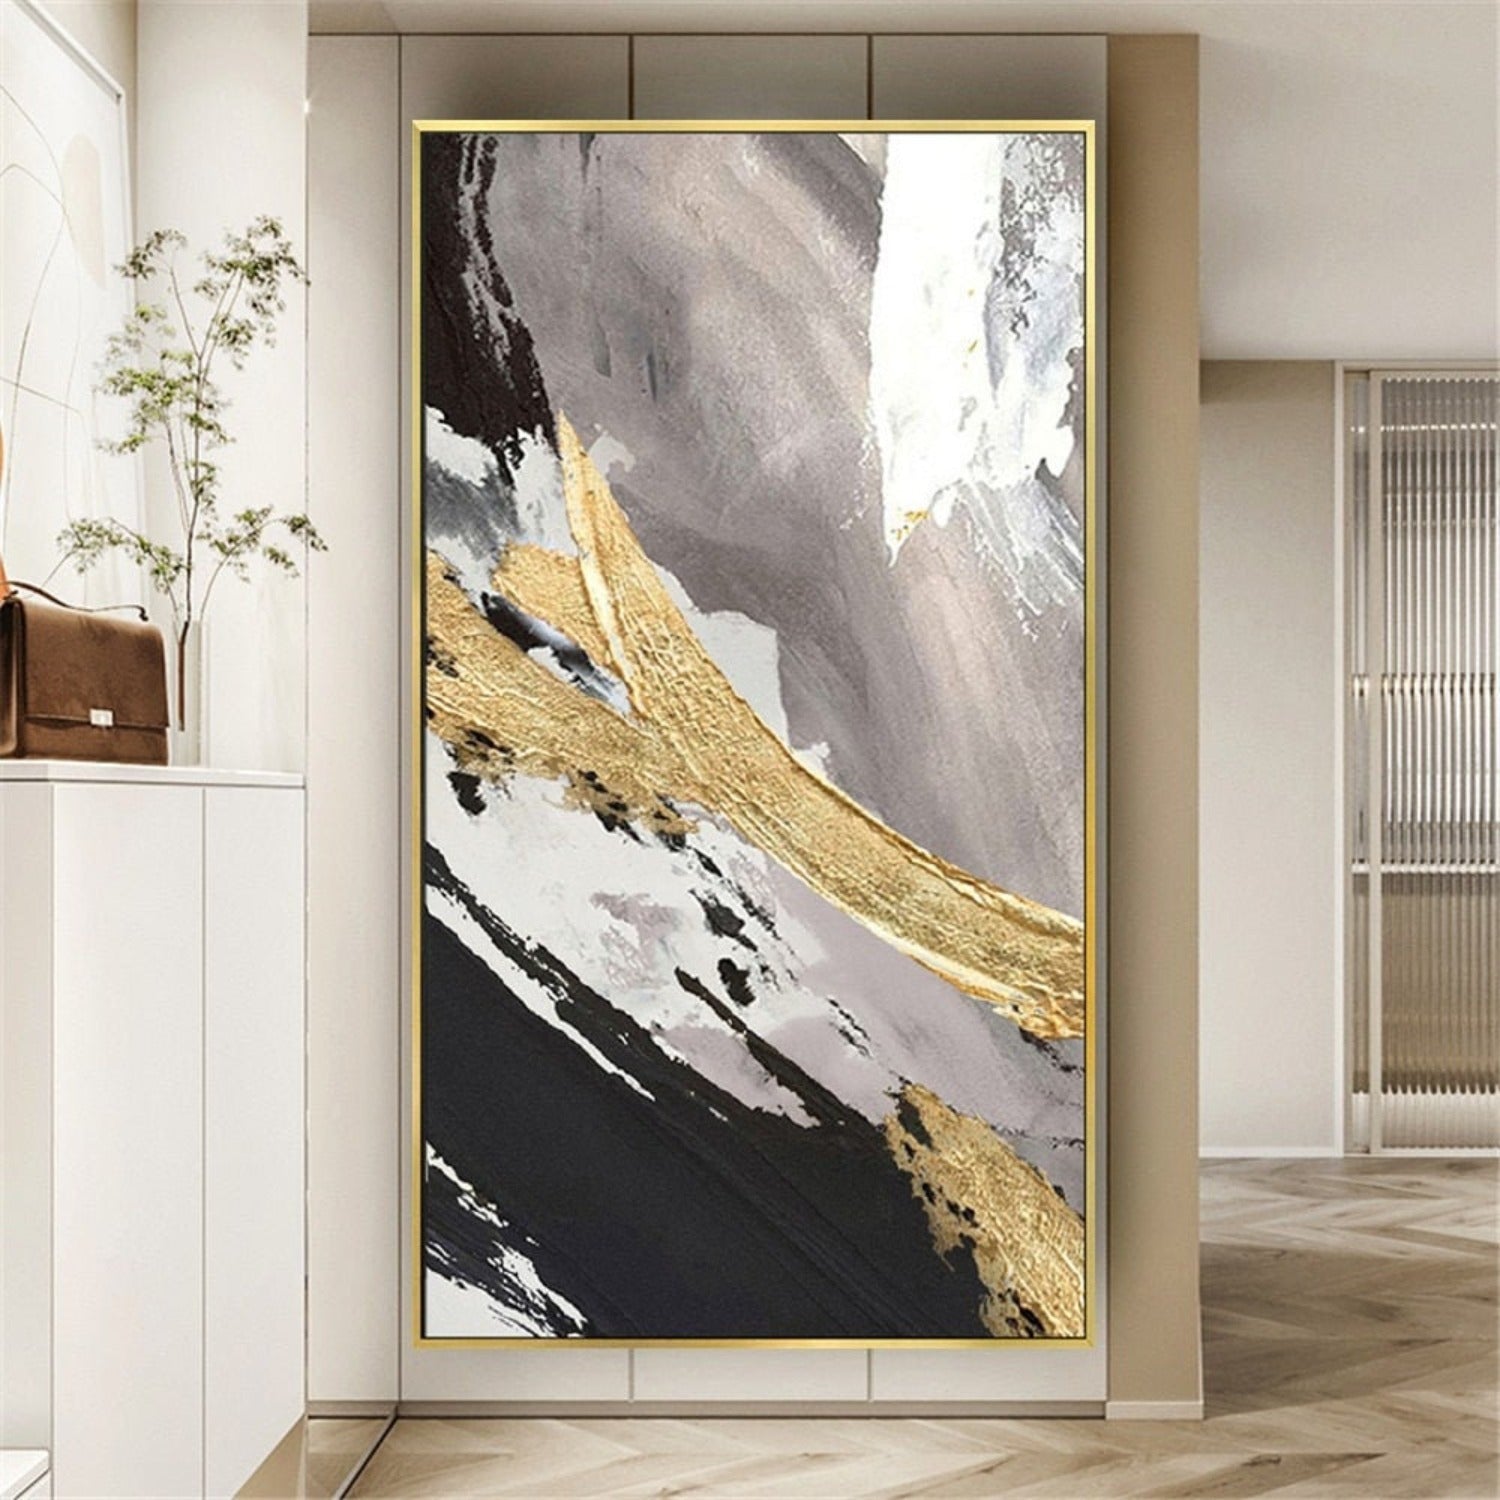 Original Gold 3D Textured Nordic Abstract Painting